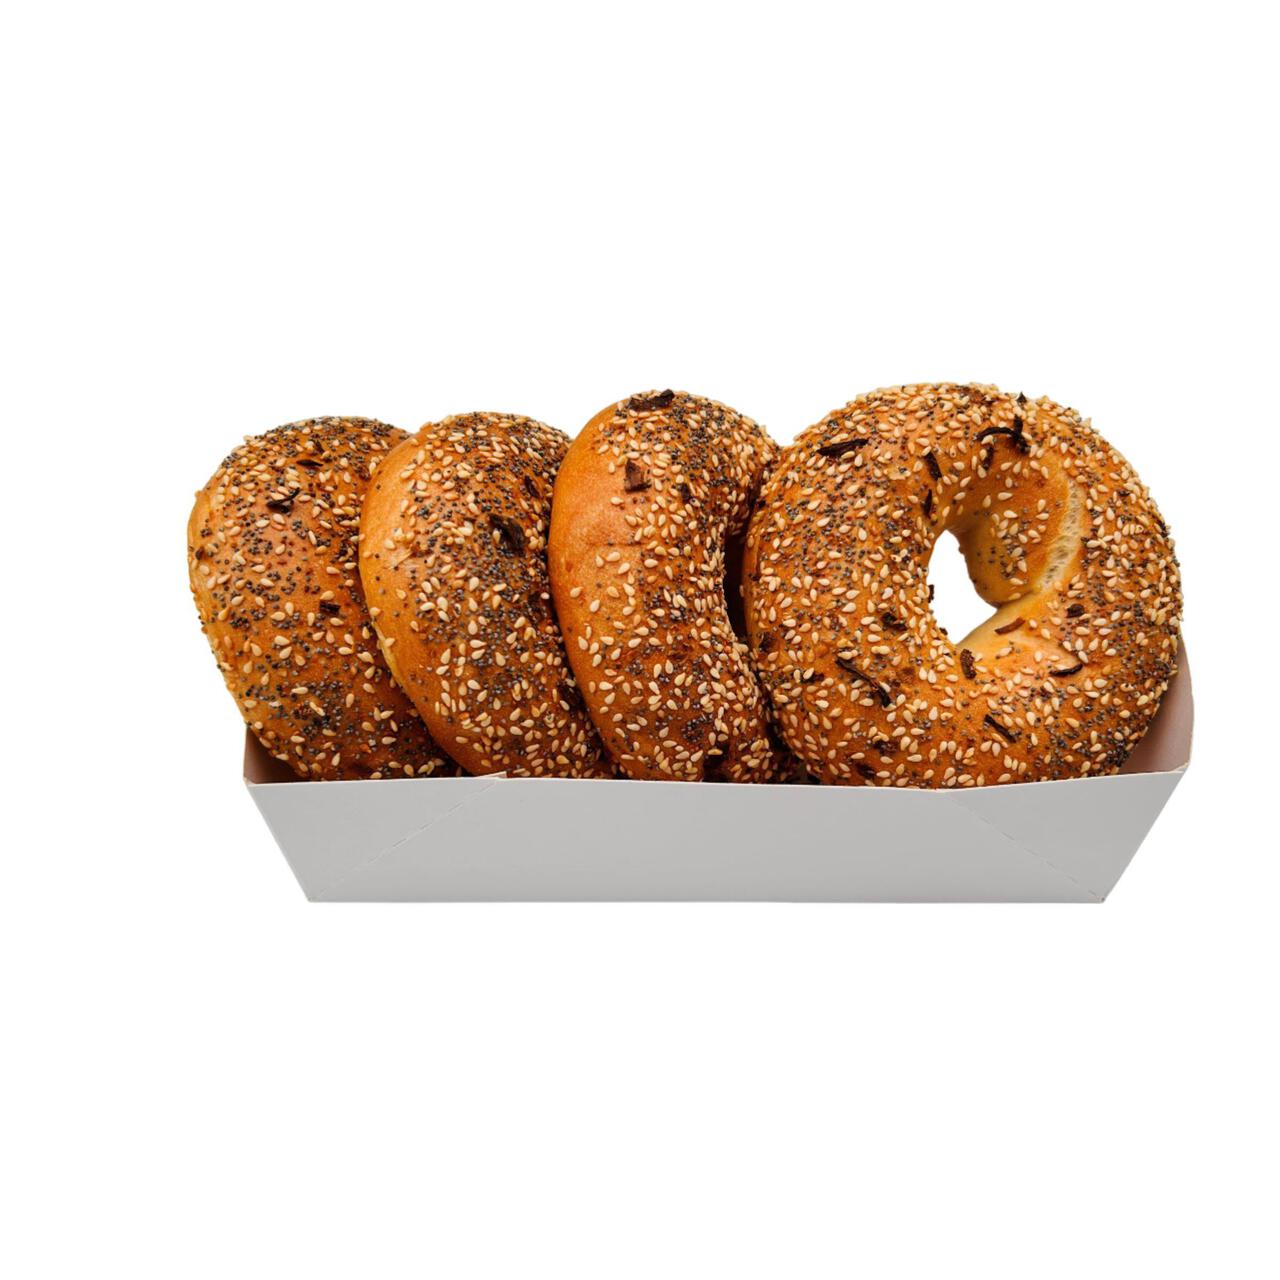 Cohens Bakery Everything Bagels 4 per pack